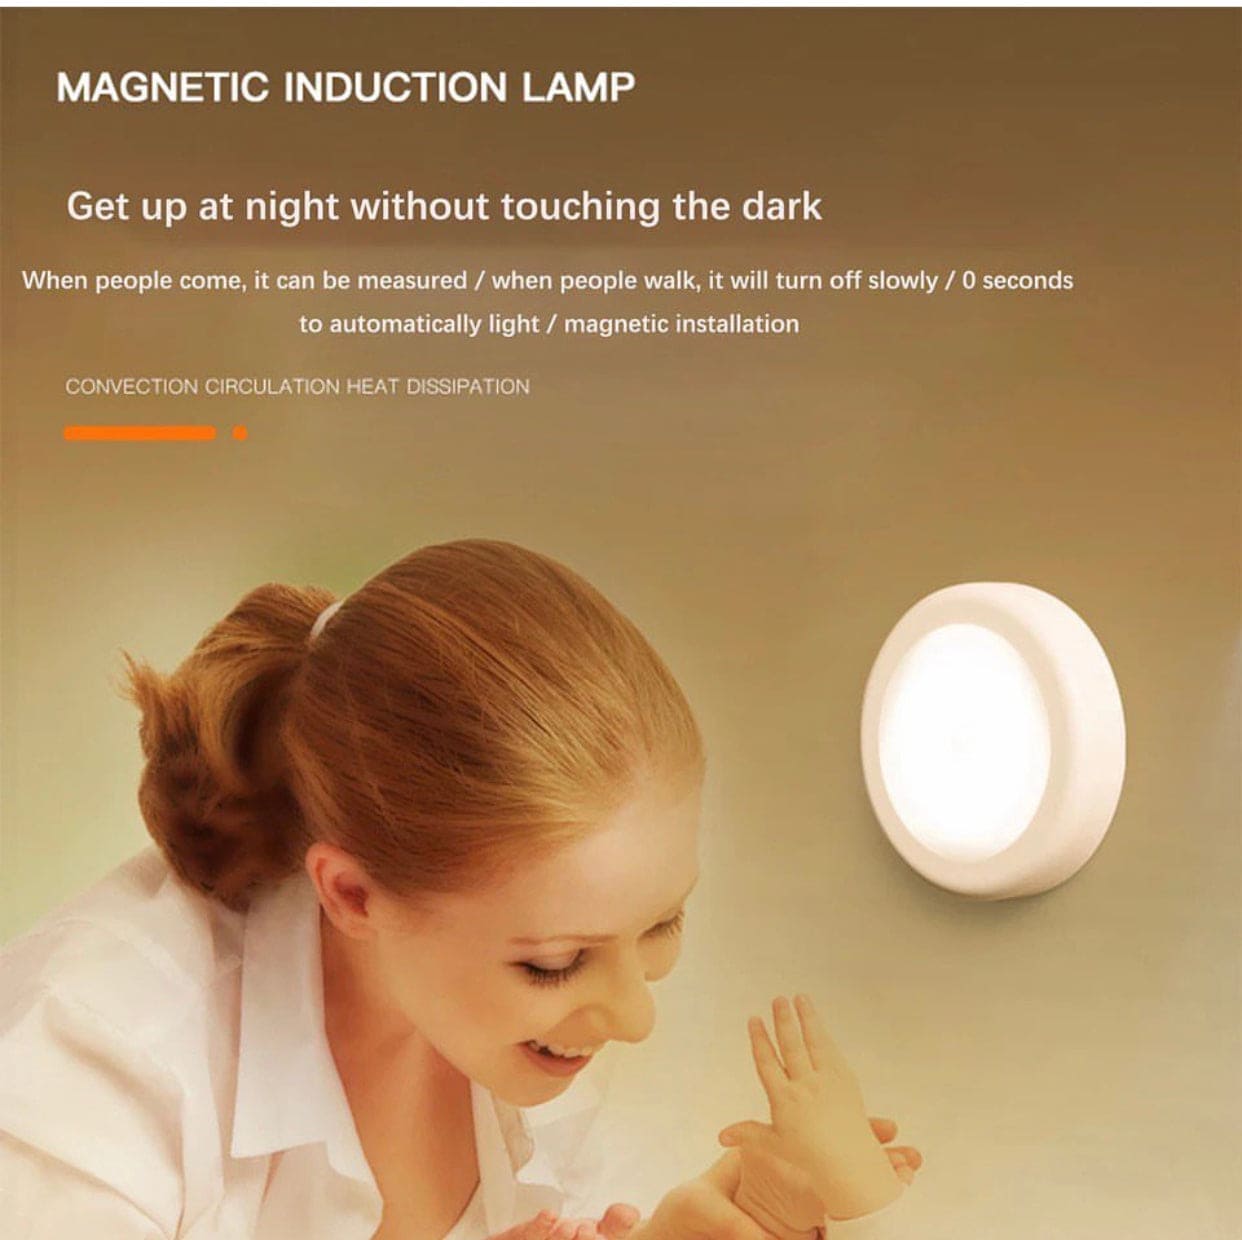 Motion Sensor Night Lamp, Magnetic Body Induction Lamp, Wireless Hook Magnetic Closet Bedroom Wall Lamp